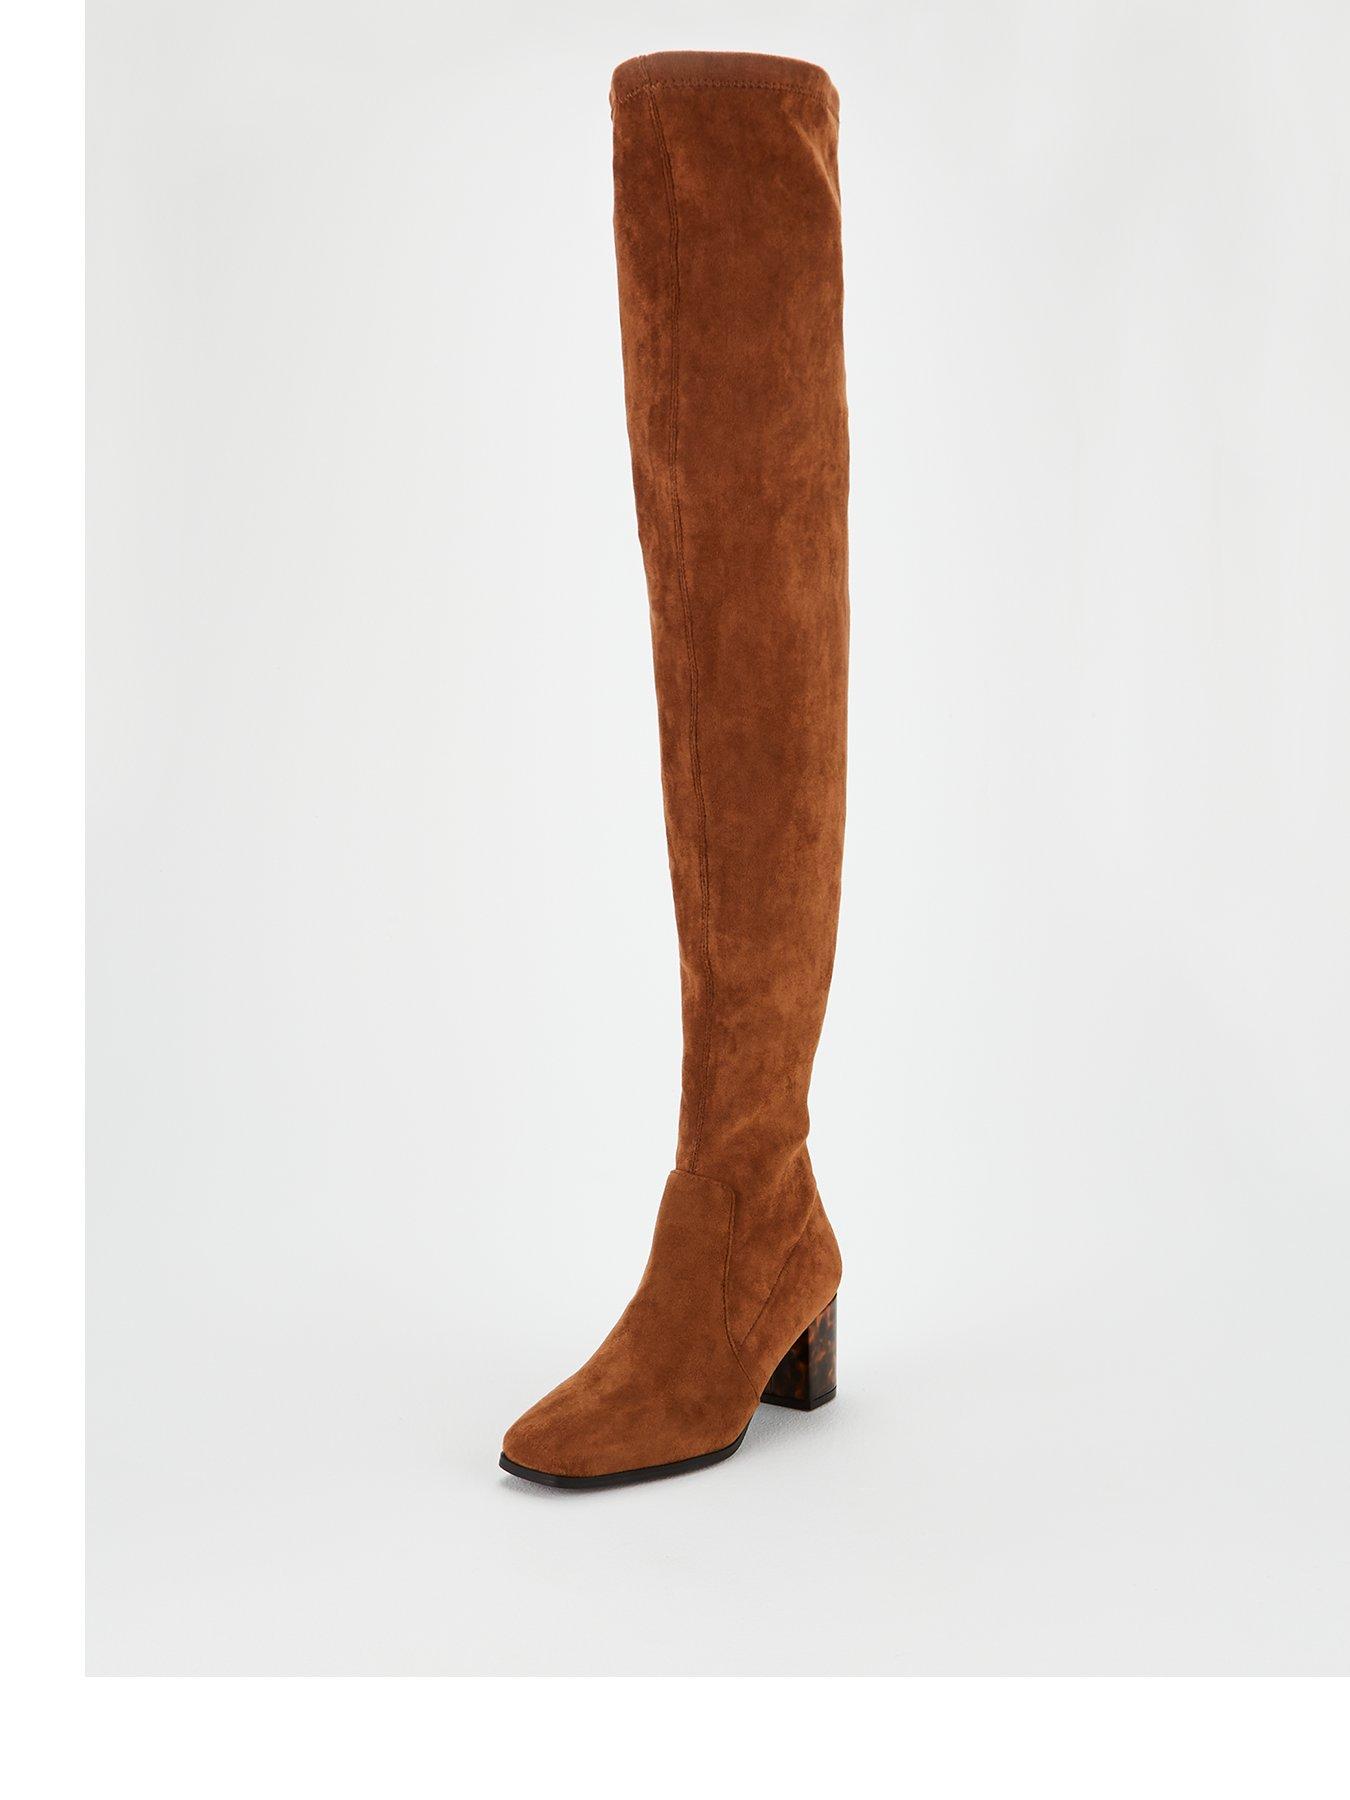 square toe over the knee boots